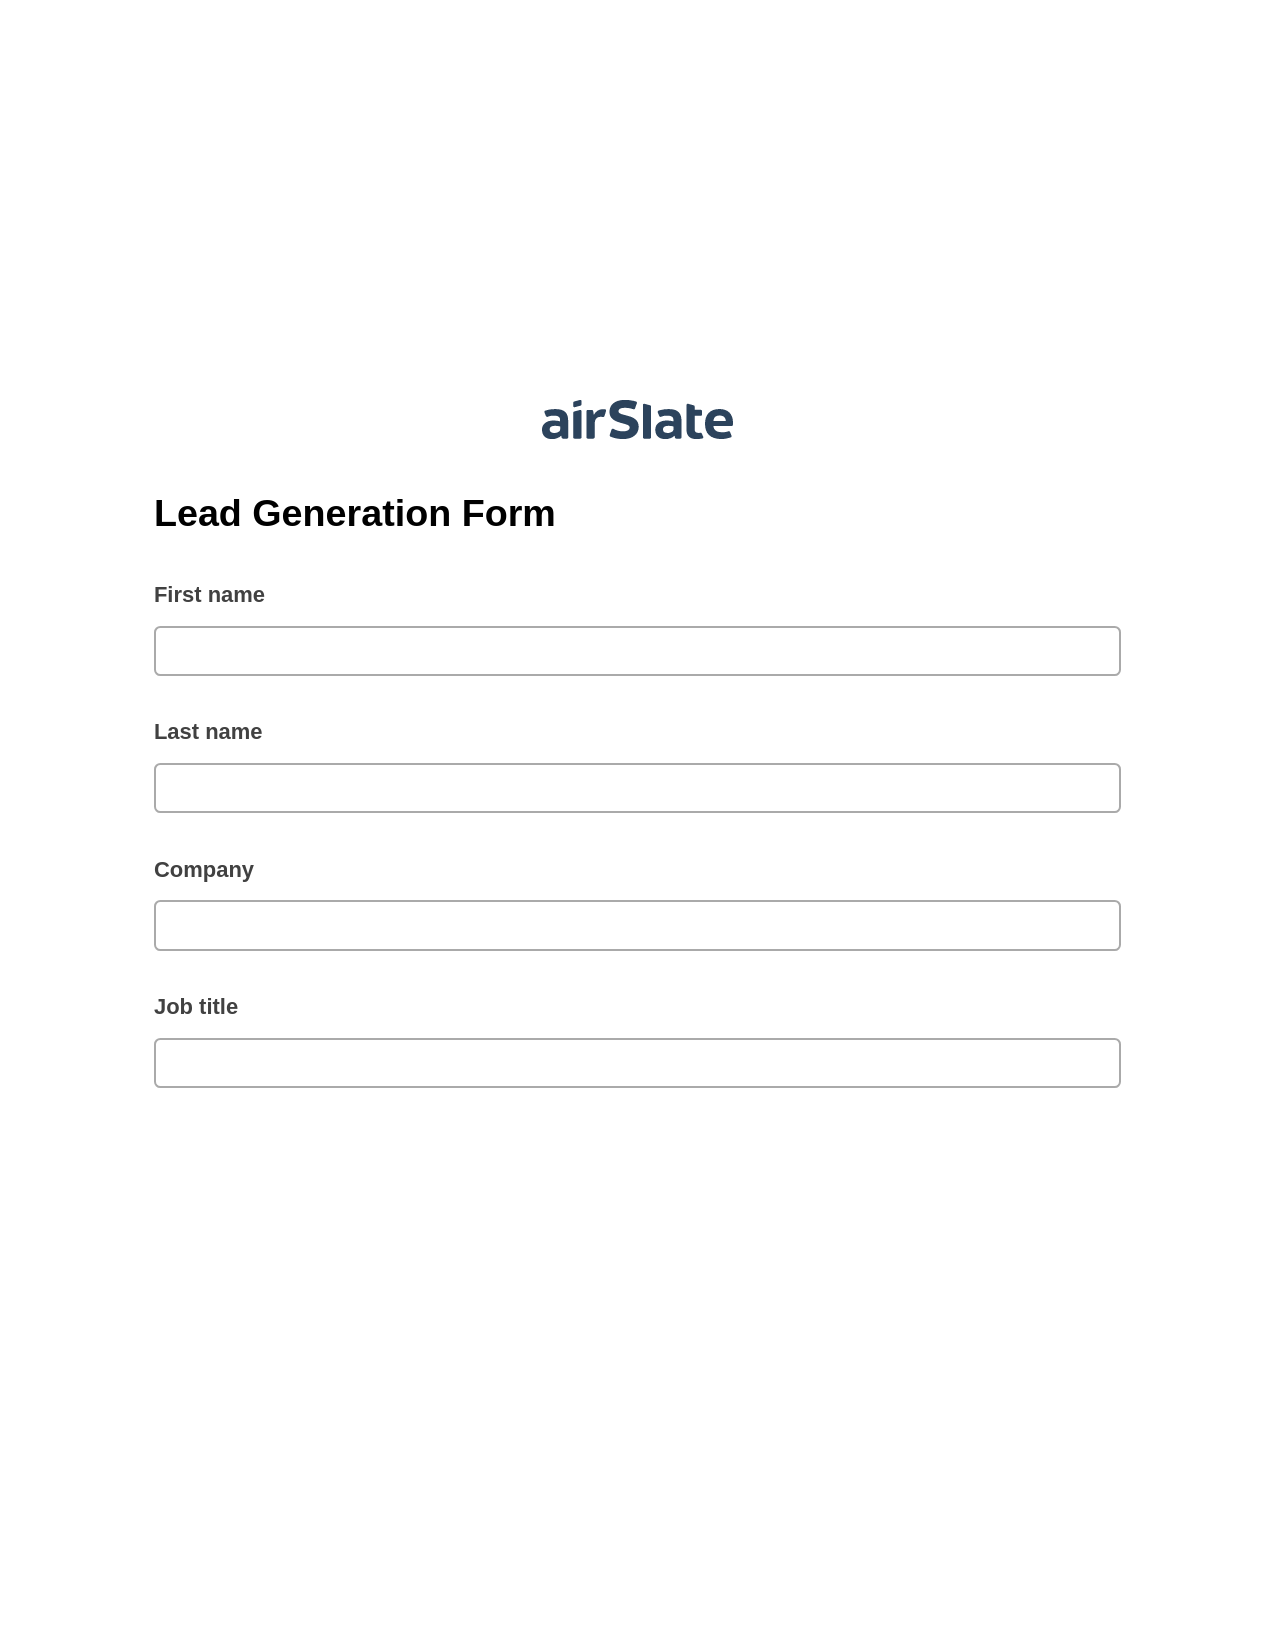 Multirole Lead Generation Form Pre-fill from Google Sheets Bot, Send a Slate to Salesforce Contact Bot, Archive to SharePoint Folder Bot